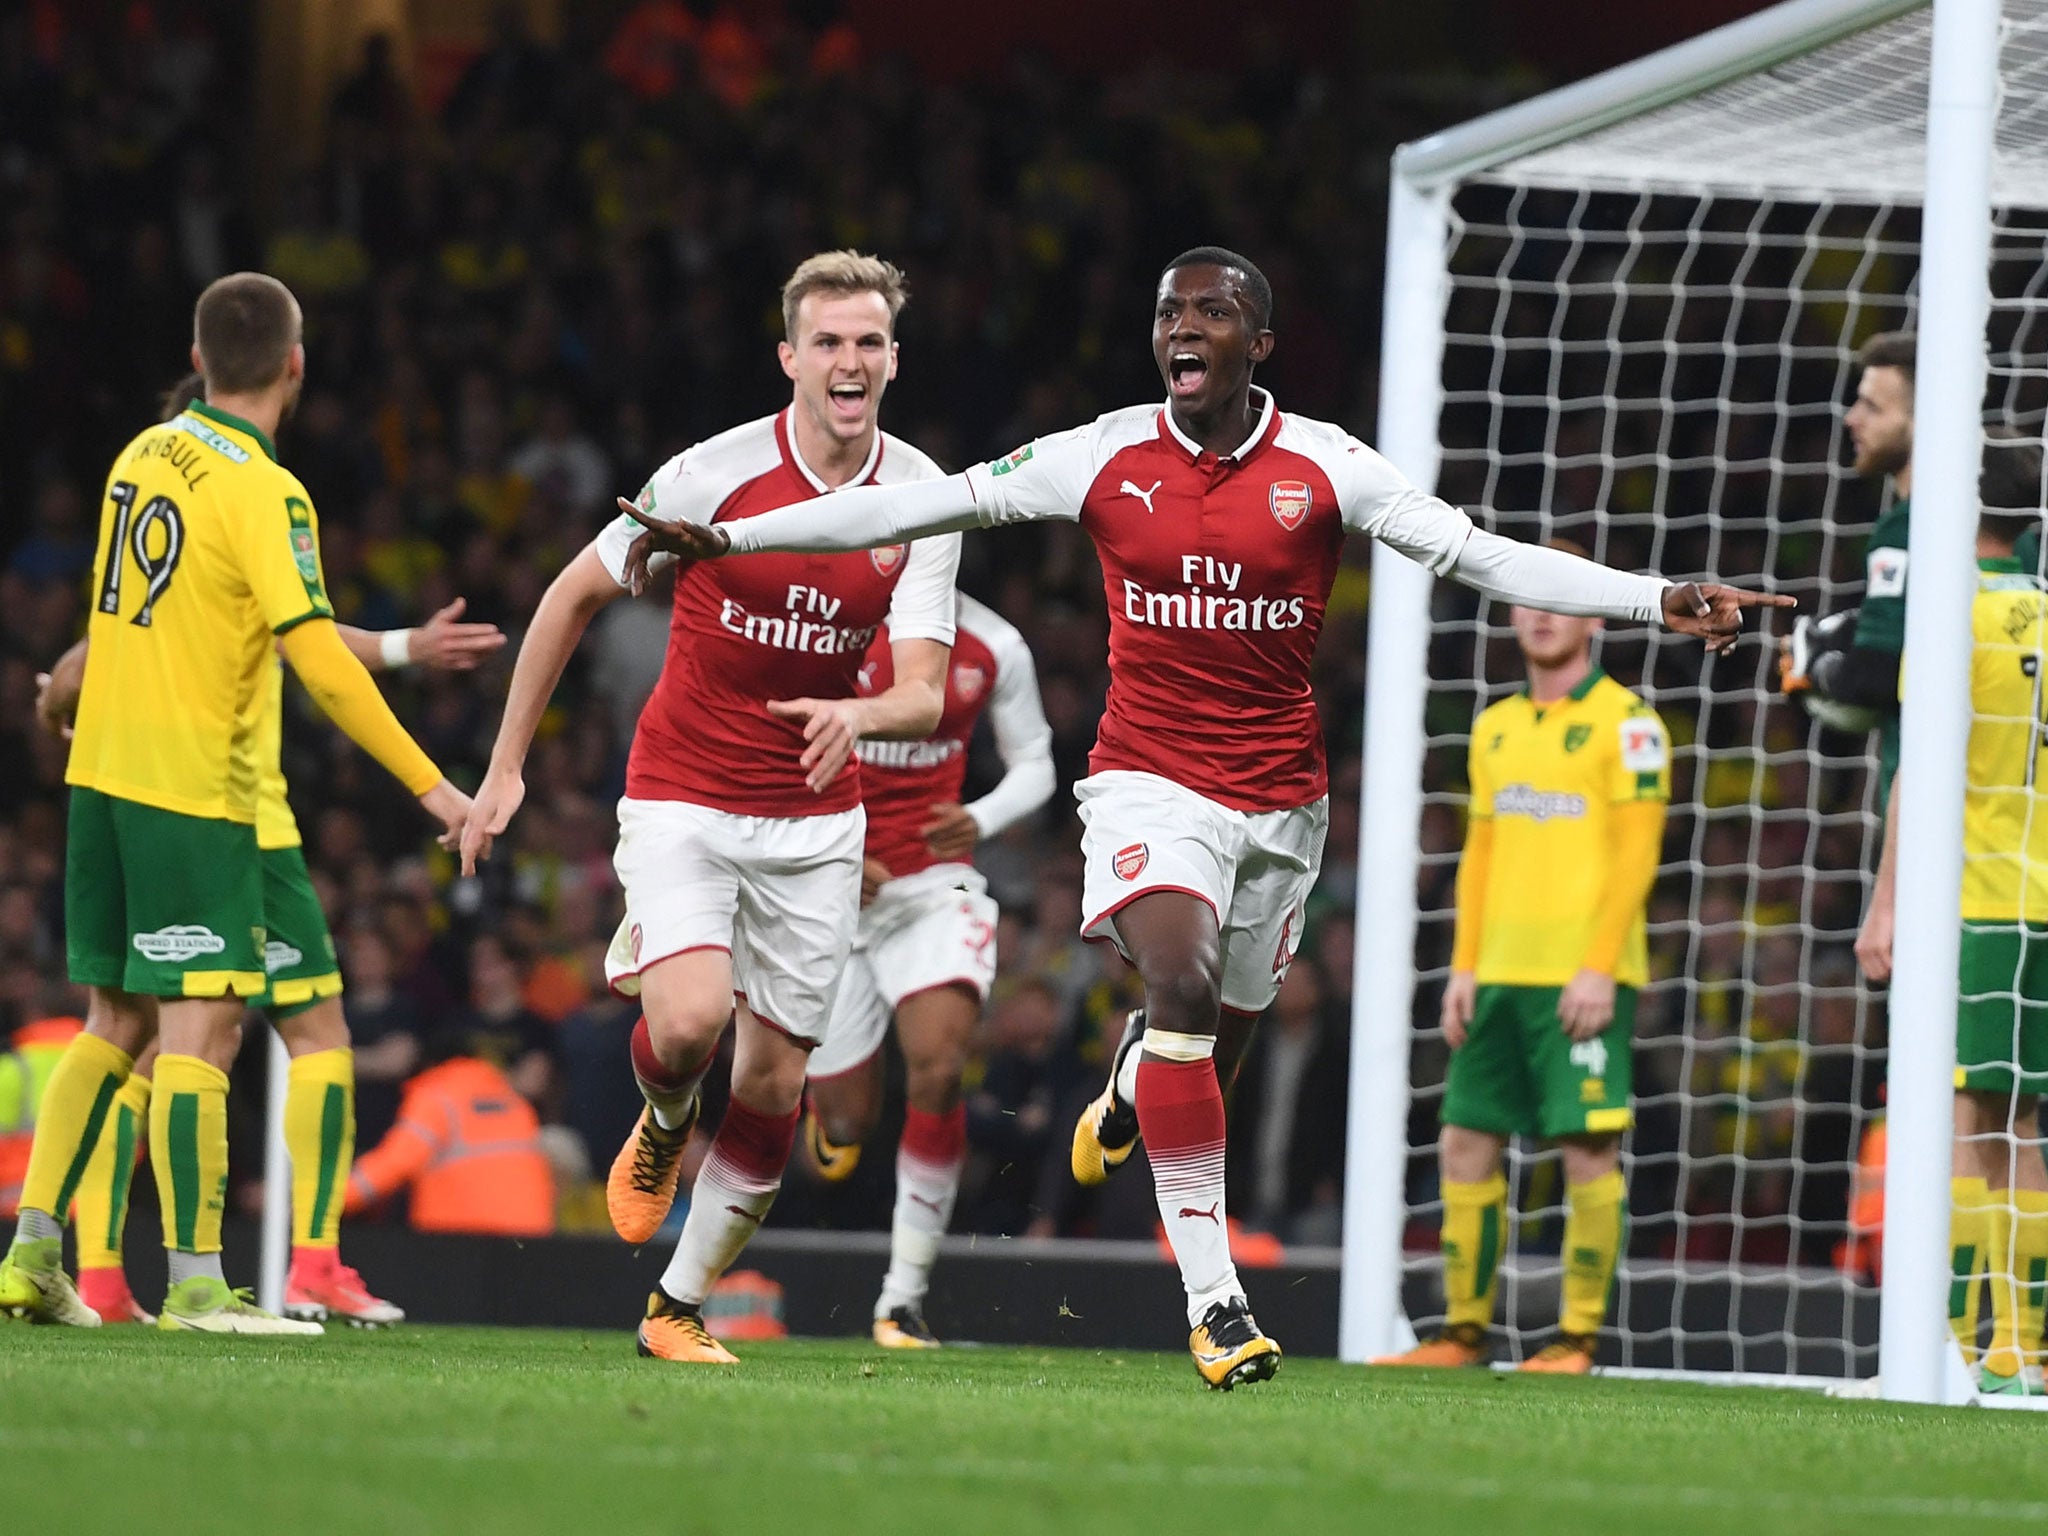 Arsene Wenger says Eddie Nketiah will be given his chance in the Arsenal first team